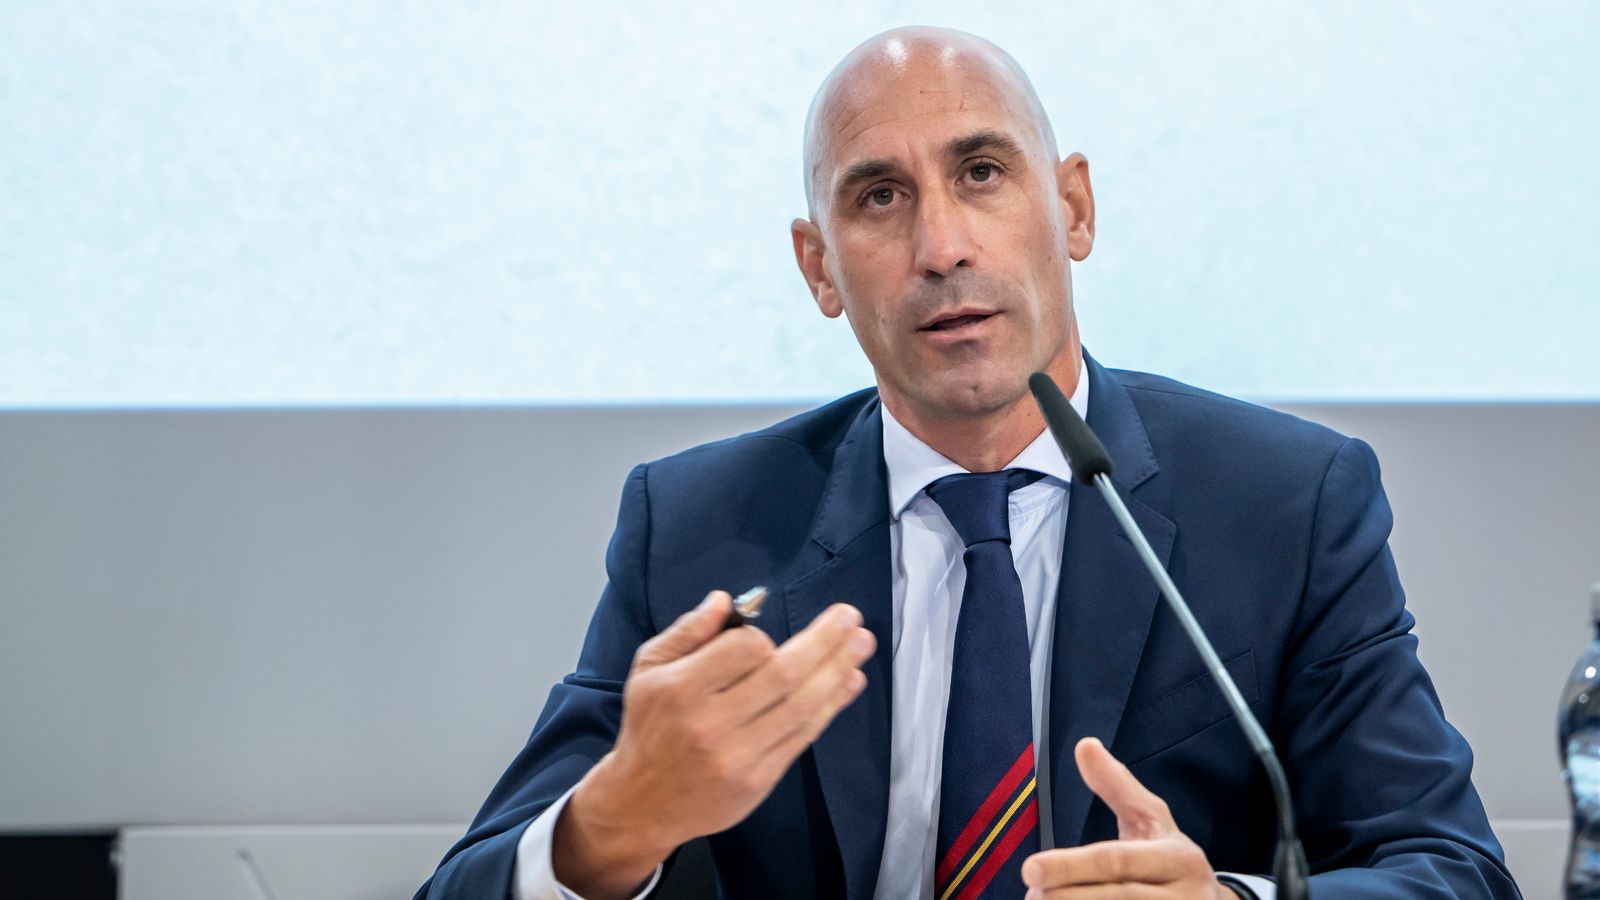 Kiss Scandal: Luis Rubiales resigns as president of Spanish FA